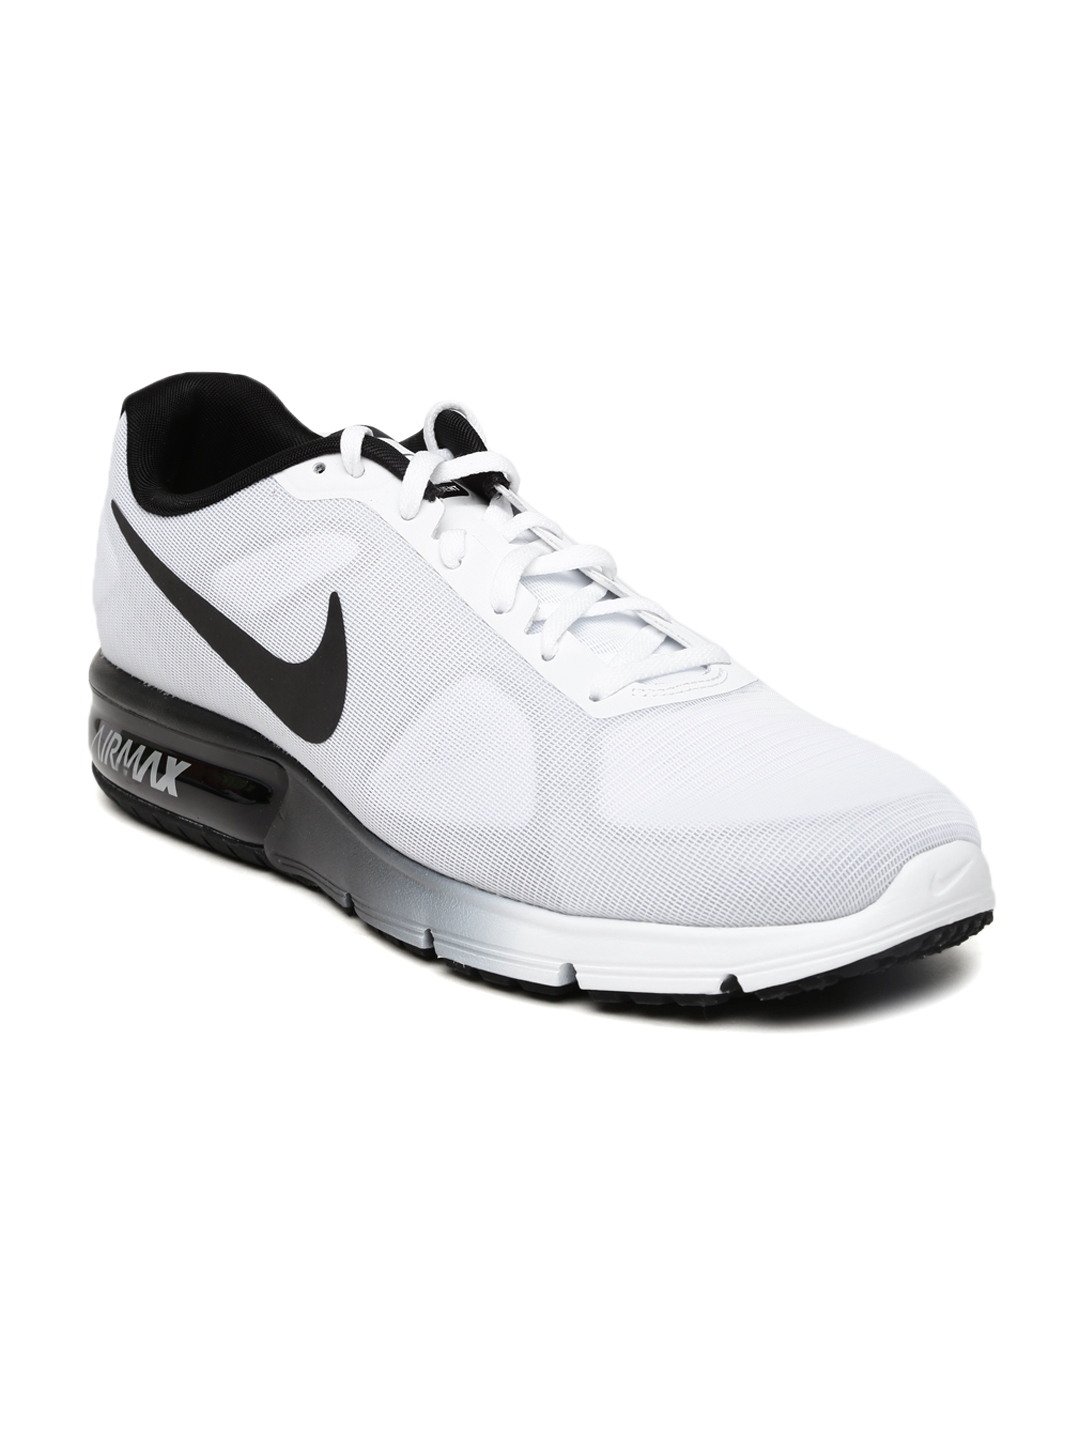 Buy Nike Men White Max Sequent Running Shoes - Sports Shoes for Men 1420923 | Myntra